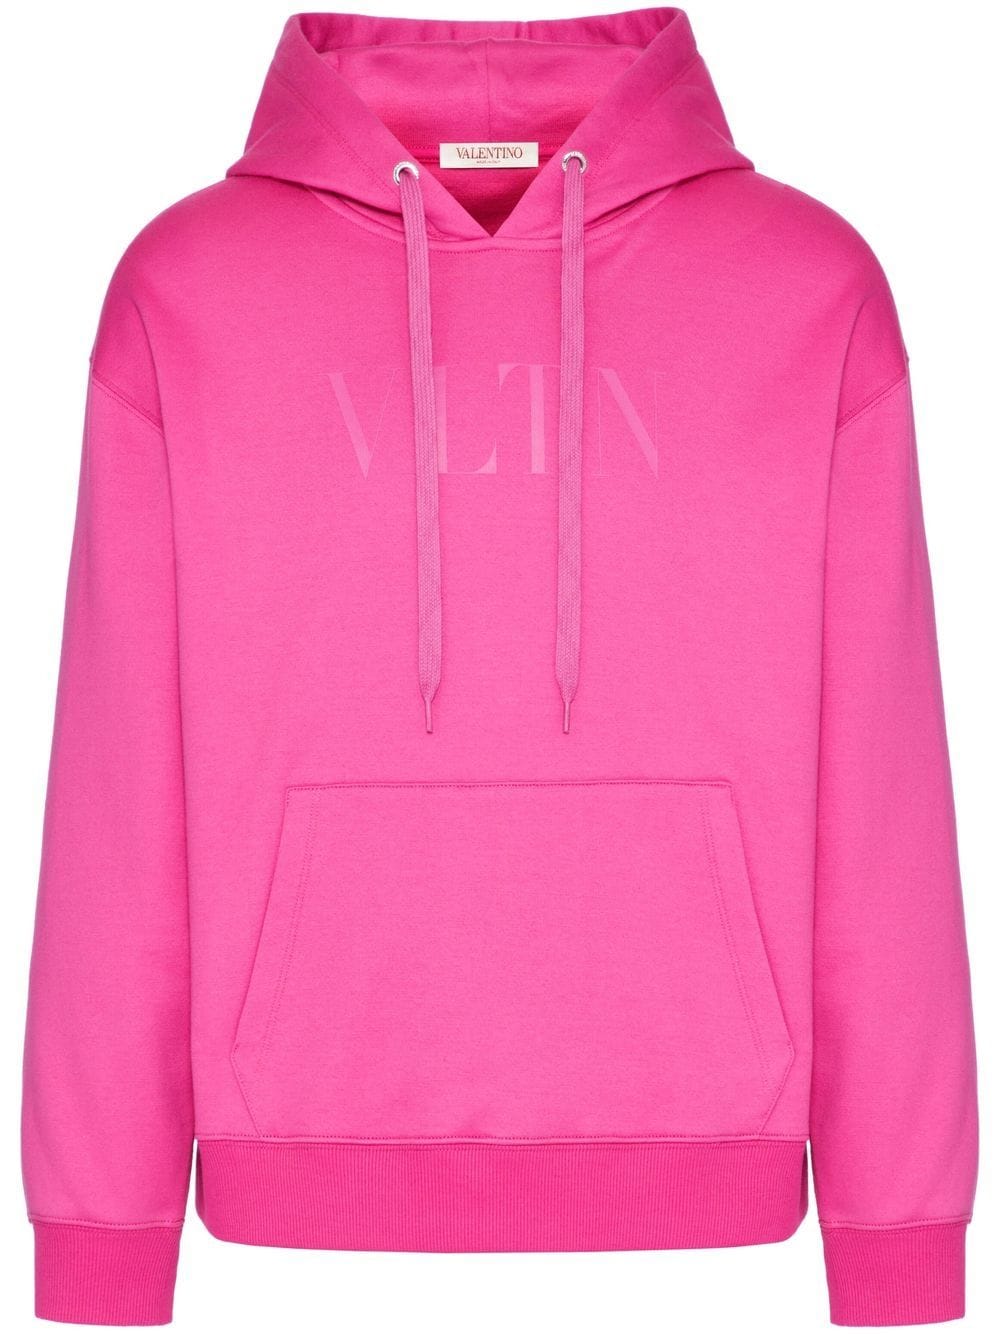 Valentino Cotton Hooded Sweatshirt With Vltn Print In Pink Pp